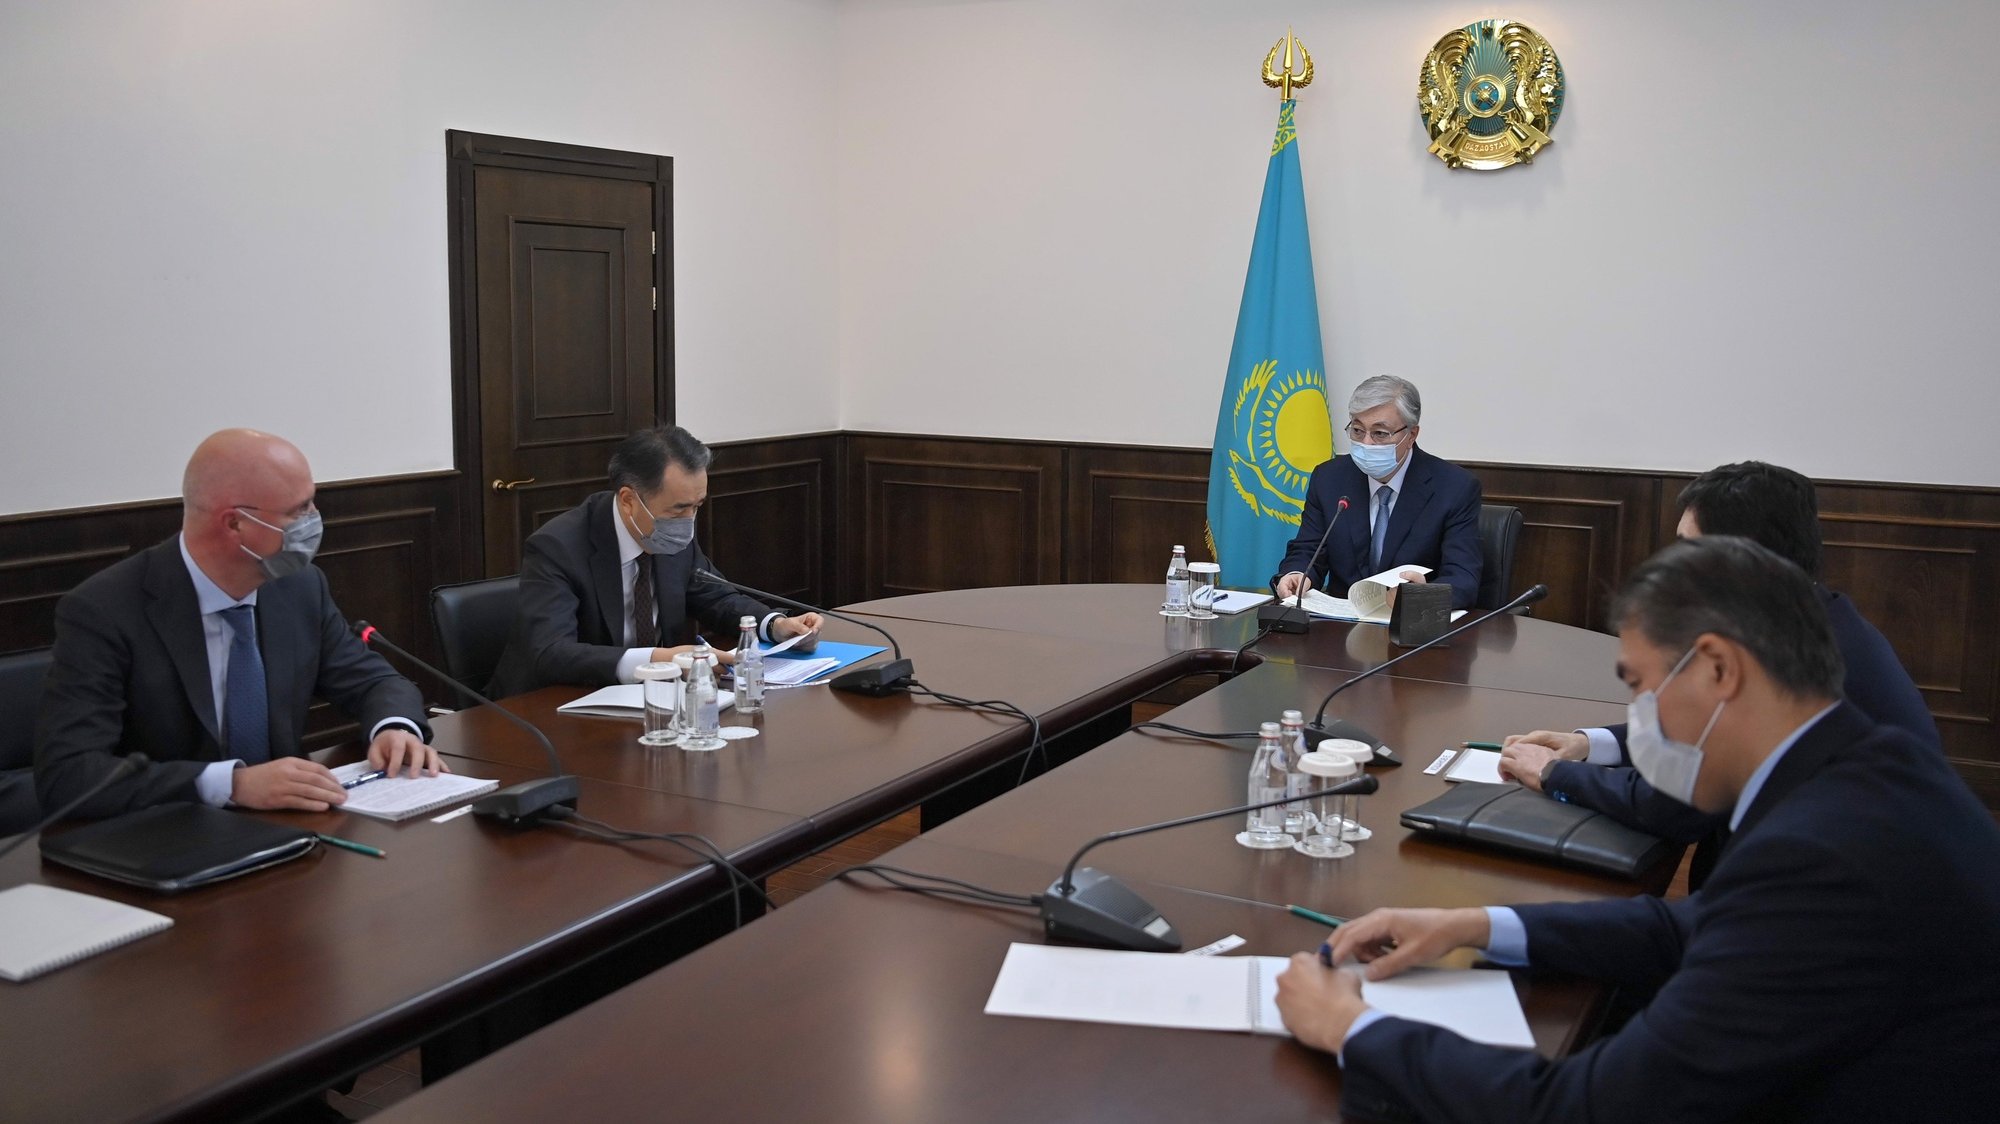 epa09680655 A handout photo made available by the Kazakh presidential press service shows Kazakh President Kassym-Jomart Tokayev (C) heads a meeting of the operational headquarters in Almaty, Kazakhstan, 12 January 2022. Tokayev reported on the forthcoming withdrawal of the CSTO united peacekeeping contingent. Mass protests in Kazakhstan began in the early days of 2022 - residents of the cities of Zhanaozen and Aktau in the west of the country opposed a twofold increase in prices for liquefied gas. Later, the protests turned into looting, the militants attacked state institutions, took away weapons. The authorities declared a state of emergency across the country until 19 January and launched a counter-terrorism operation. 164 people where killed during the riots, as reported the Ministry of Health of Kazakhstan. As a result of the riots, 2,265 people in different regions of the country applied for medical assistance, while some 83 people are in serious condition in hospitals of Kazakhstan.  EPA/KAZAKH PRESIDENT PRESS SERVICE / HANDOUT  HANDOUT EDITORIAL USE ONLY/NO SALES